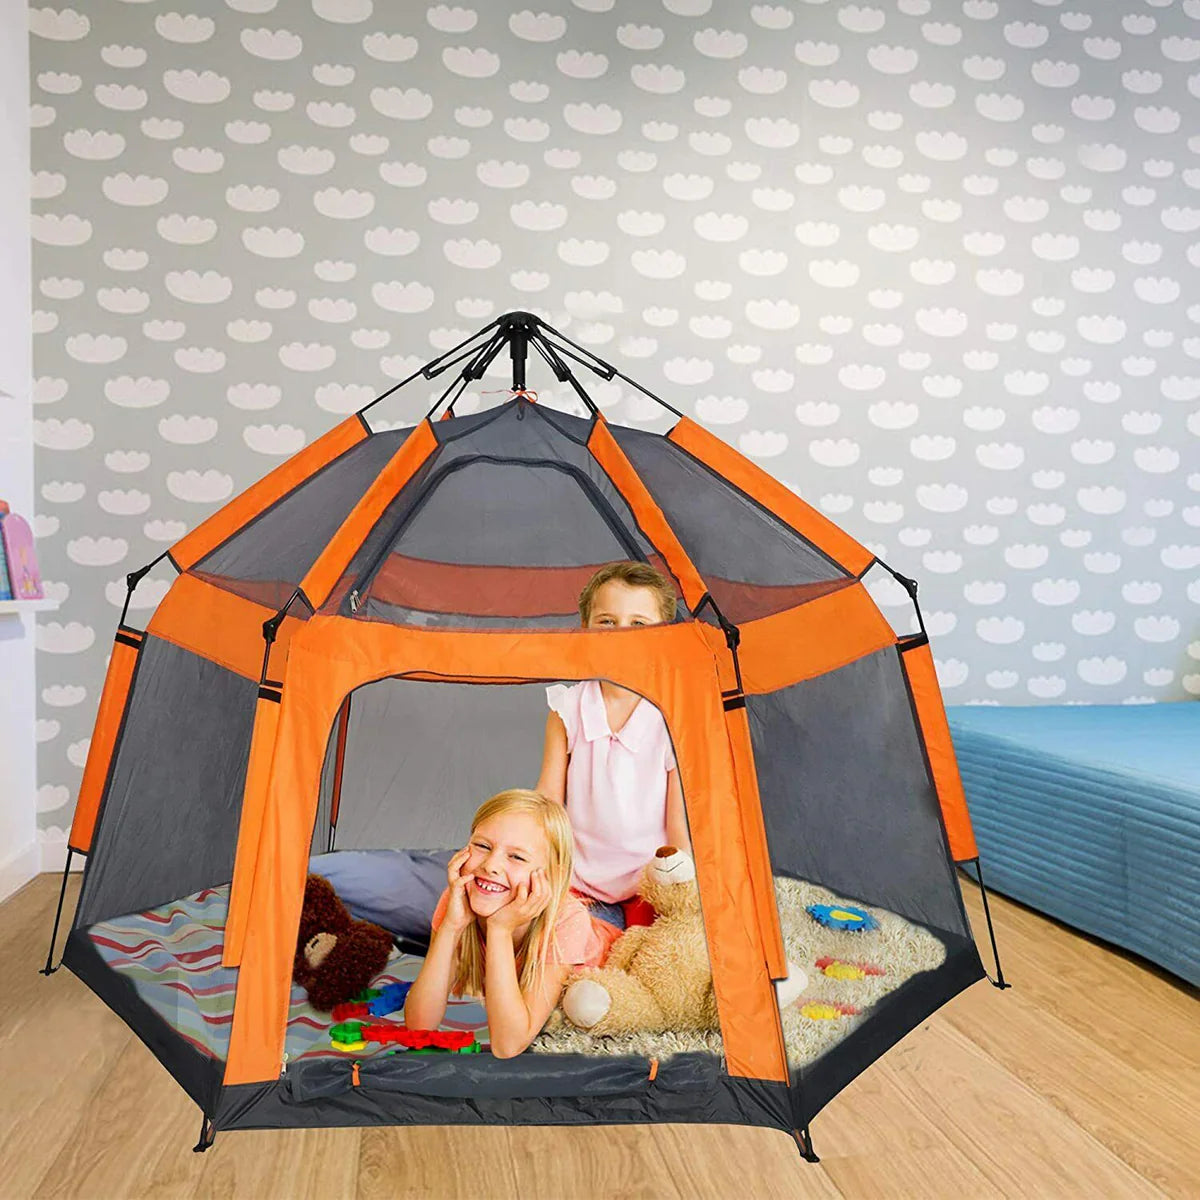 Pop Up Kids Play Tent Portable PlayHouse Camping beach Indoor Game Toys